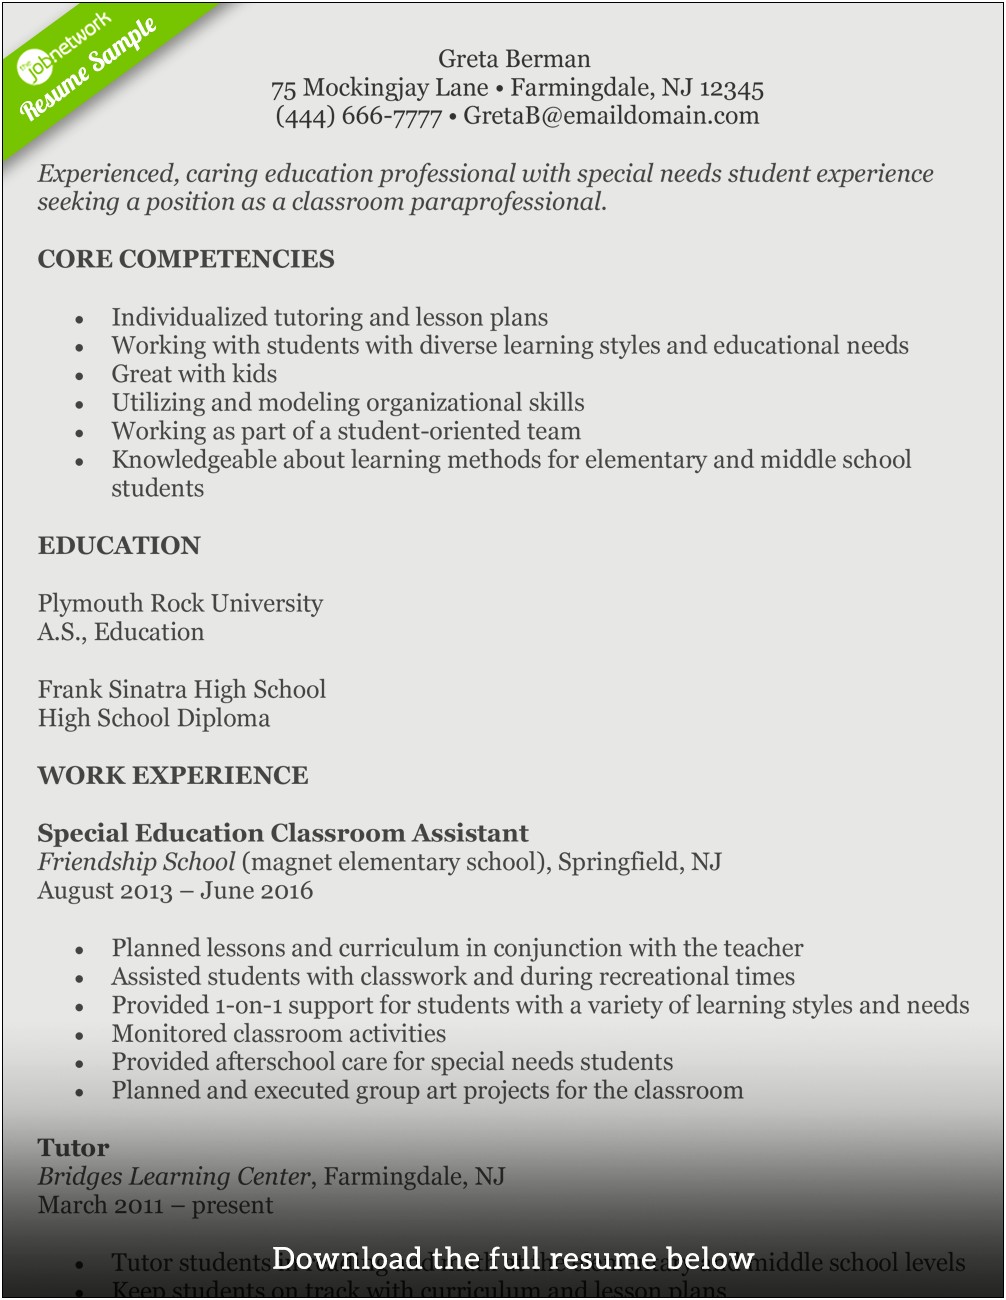 Resume Objective For High School Principal